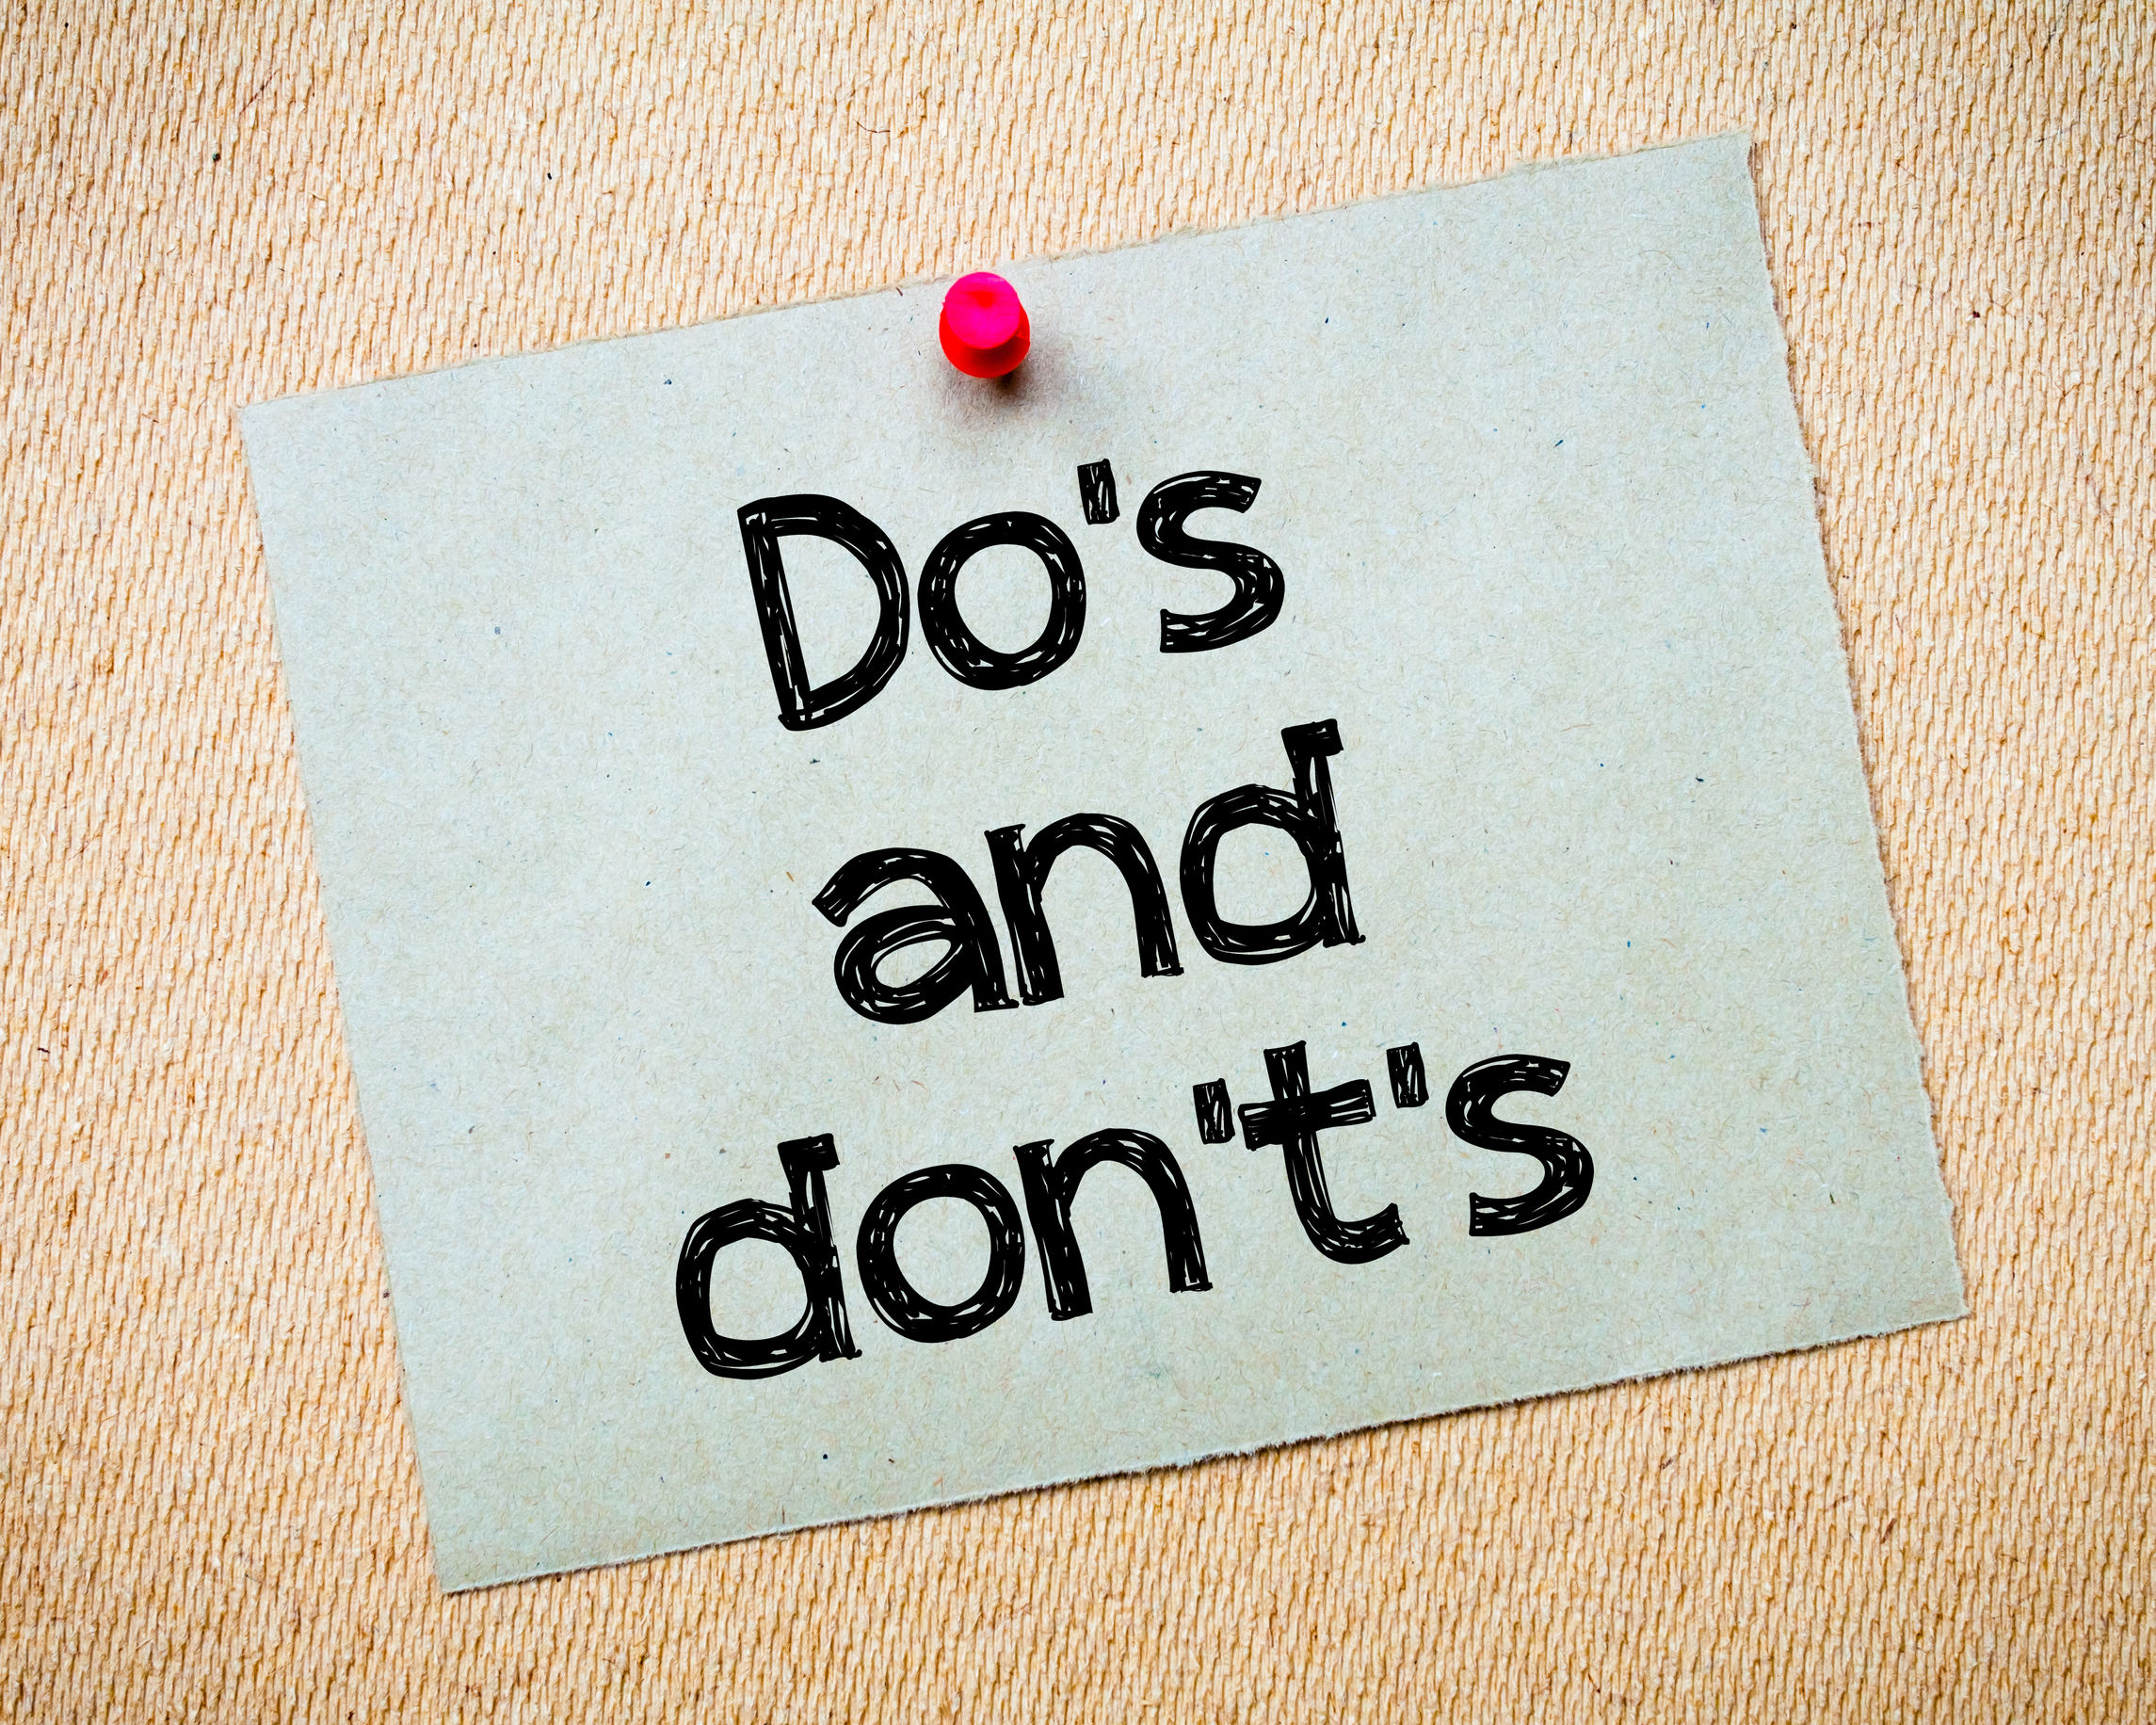 Taches dont. Do and donts. Картинки dos and donts. Do's and don'TS. Did didn't.